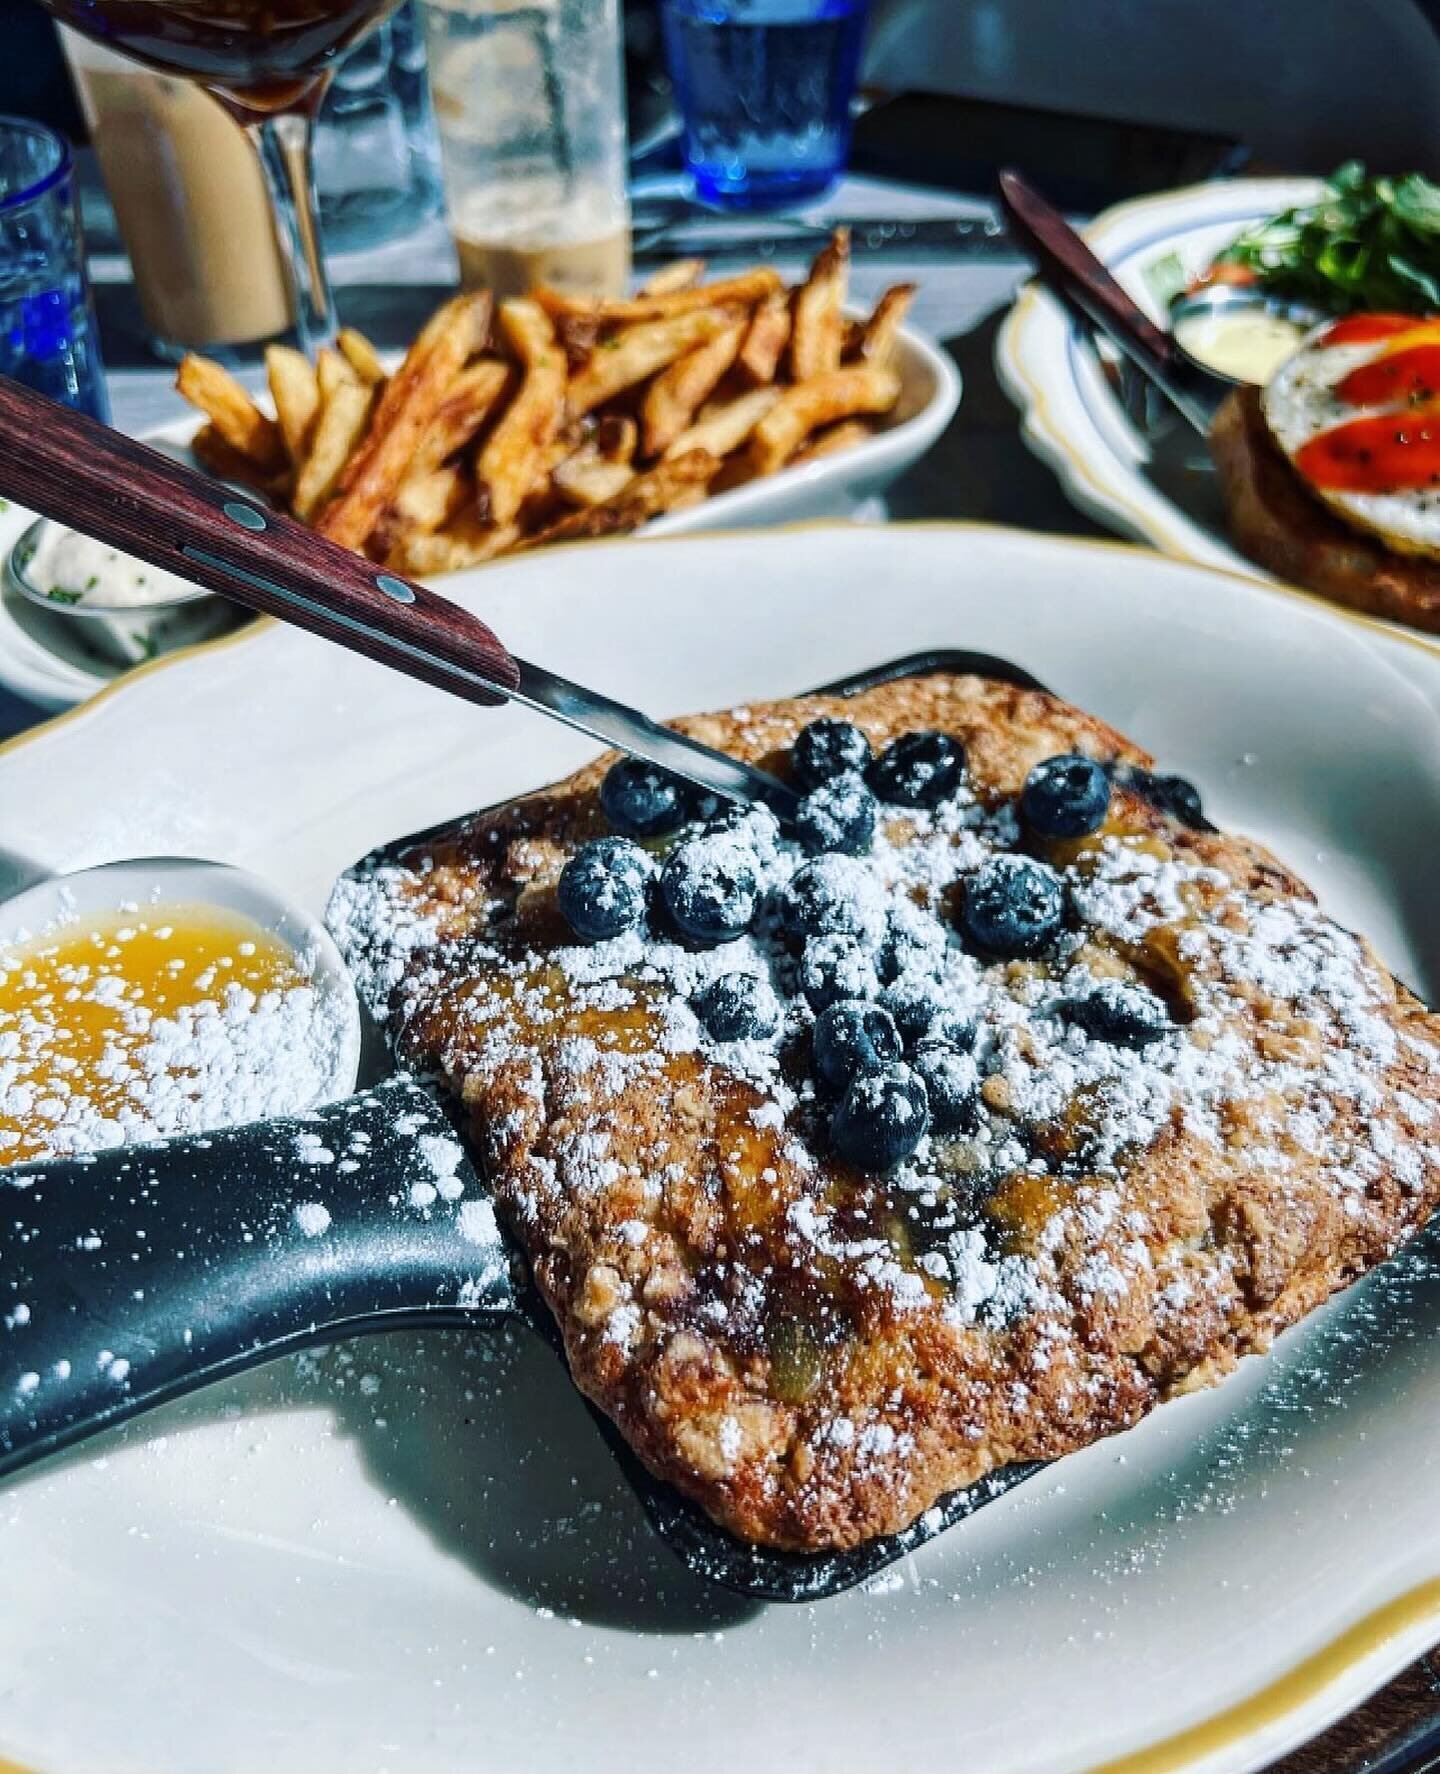 What&rsquo;s your favorite item from our brunch menu? 

Have you tried our Blueberry Muffin Iron Skillet? It&rsquo;s always baked from scratch with fresh blueberries, oatmeal streusel &amp; lemon curd.

📸: @dinewithmonica 

#thewhalechicago #chicago